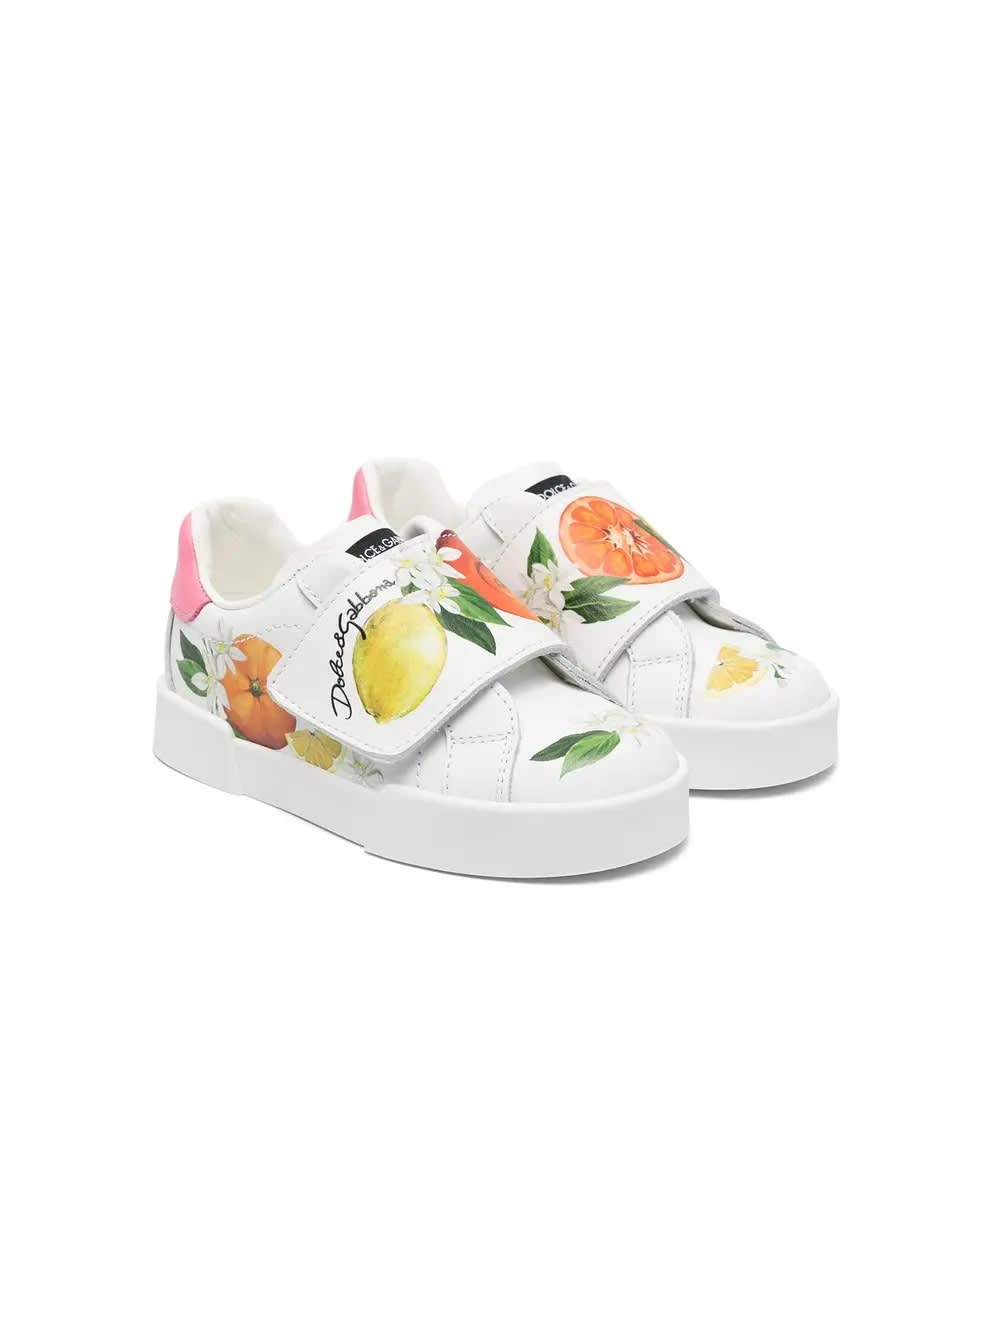 Dolce & Gabbana Printed White Leather First Steps Portofino Sneakers